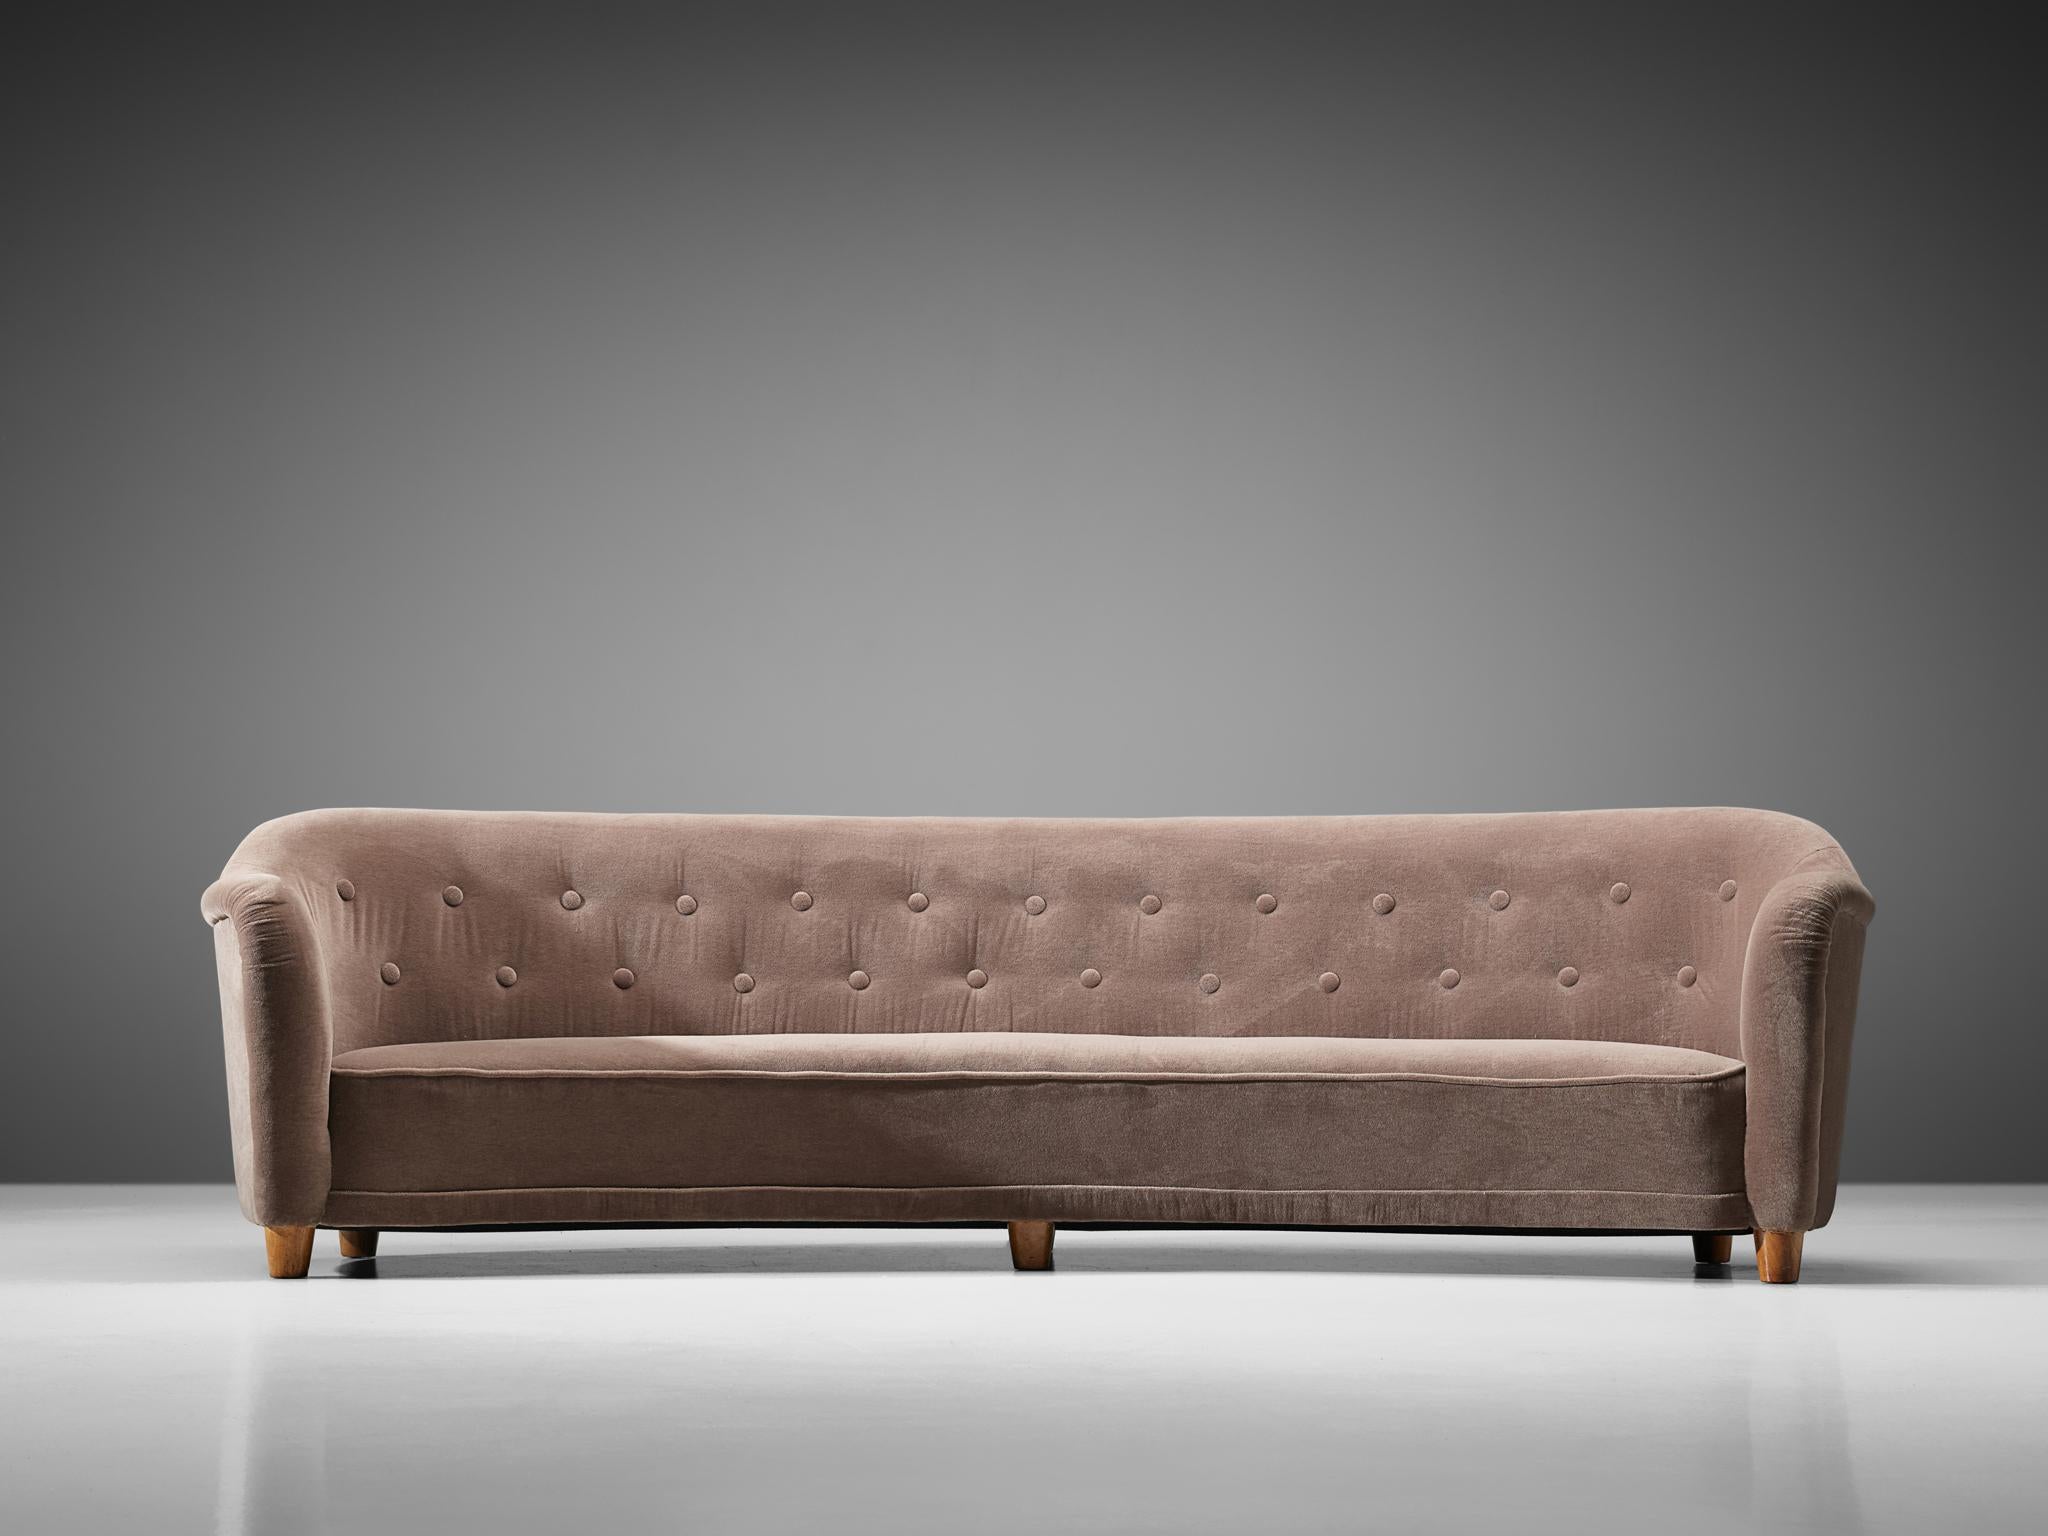 Large curved sofa, possibly by Greta Magnusson-Grossman for Studio, wood and fabric,

Sweden, circa 1938.

This rare sofa, upholstered in a mauve velvet fabric was produced circa 1938. The design is attributed to designer Greta Magnusson-Grossman